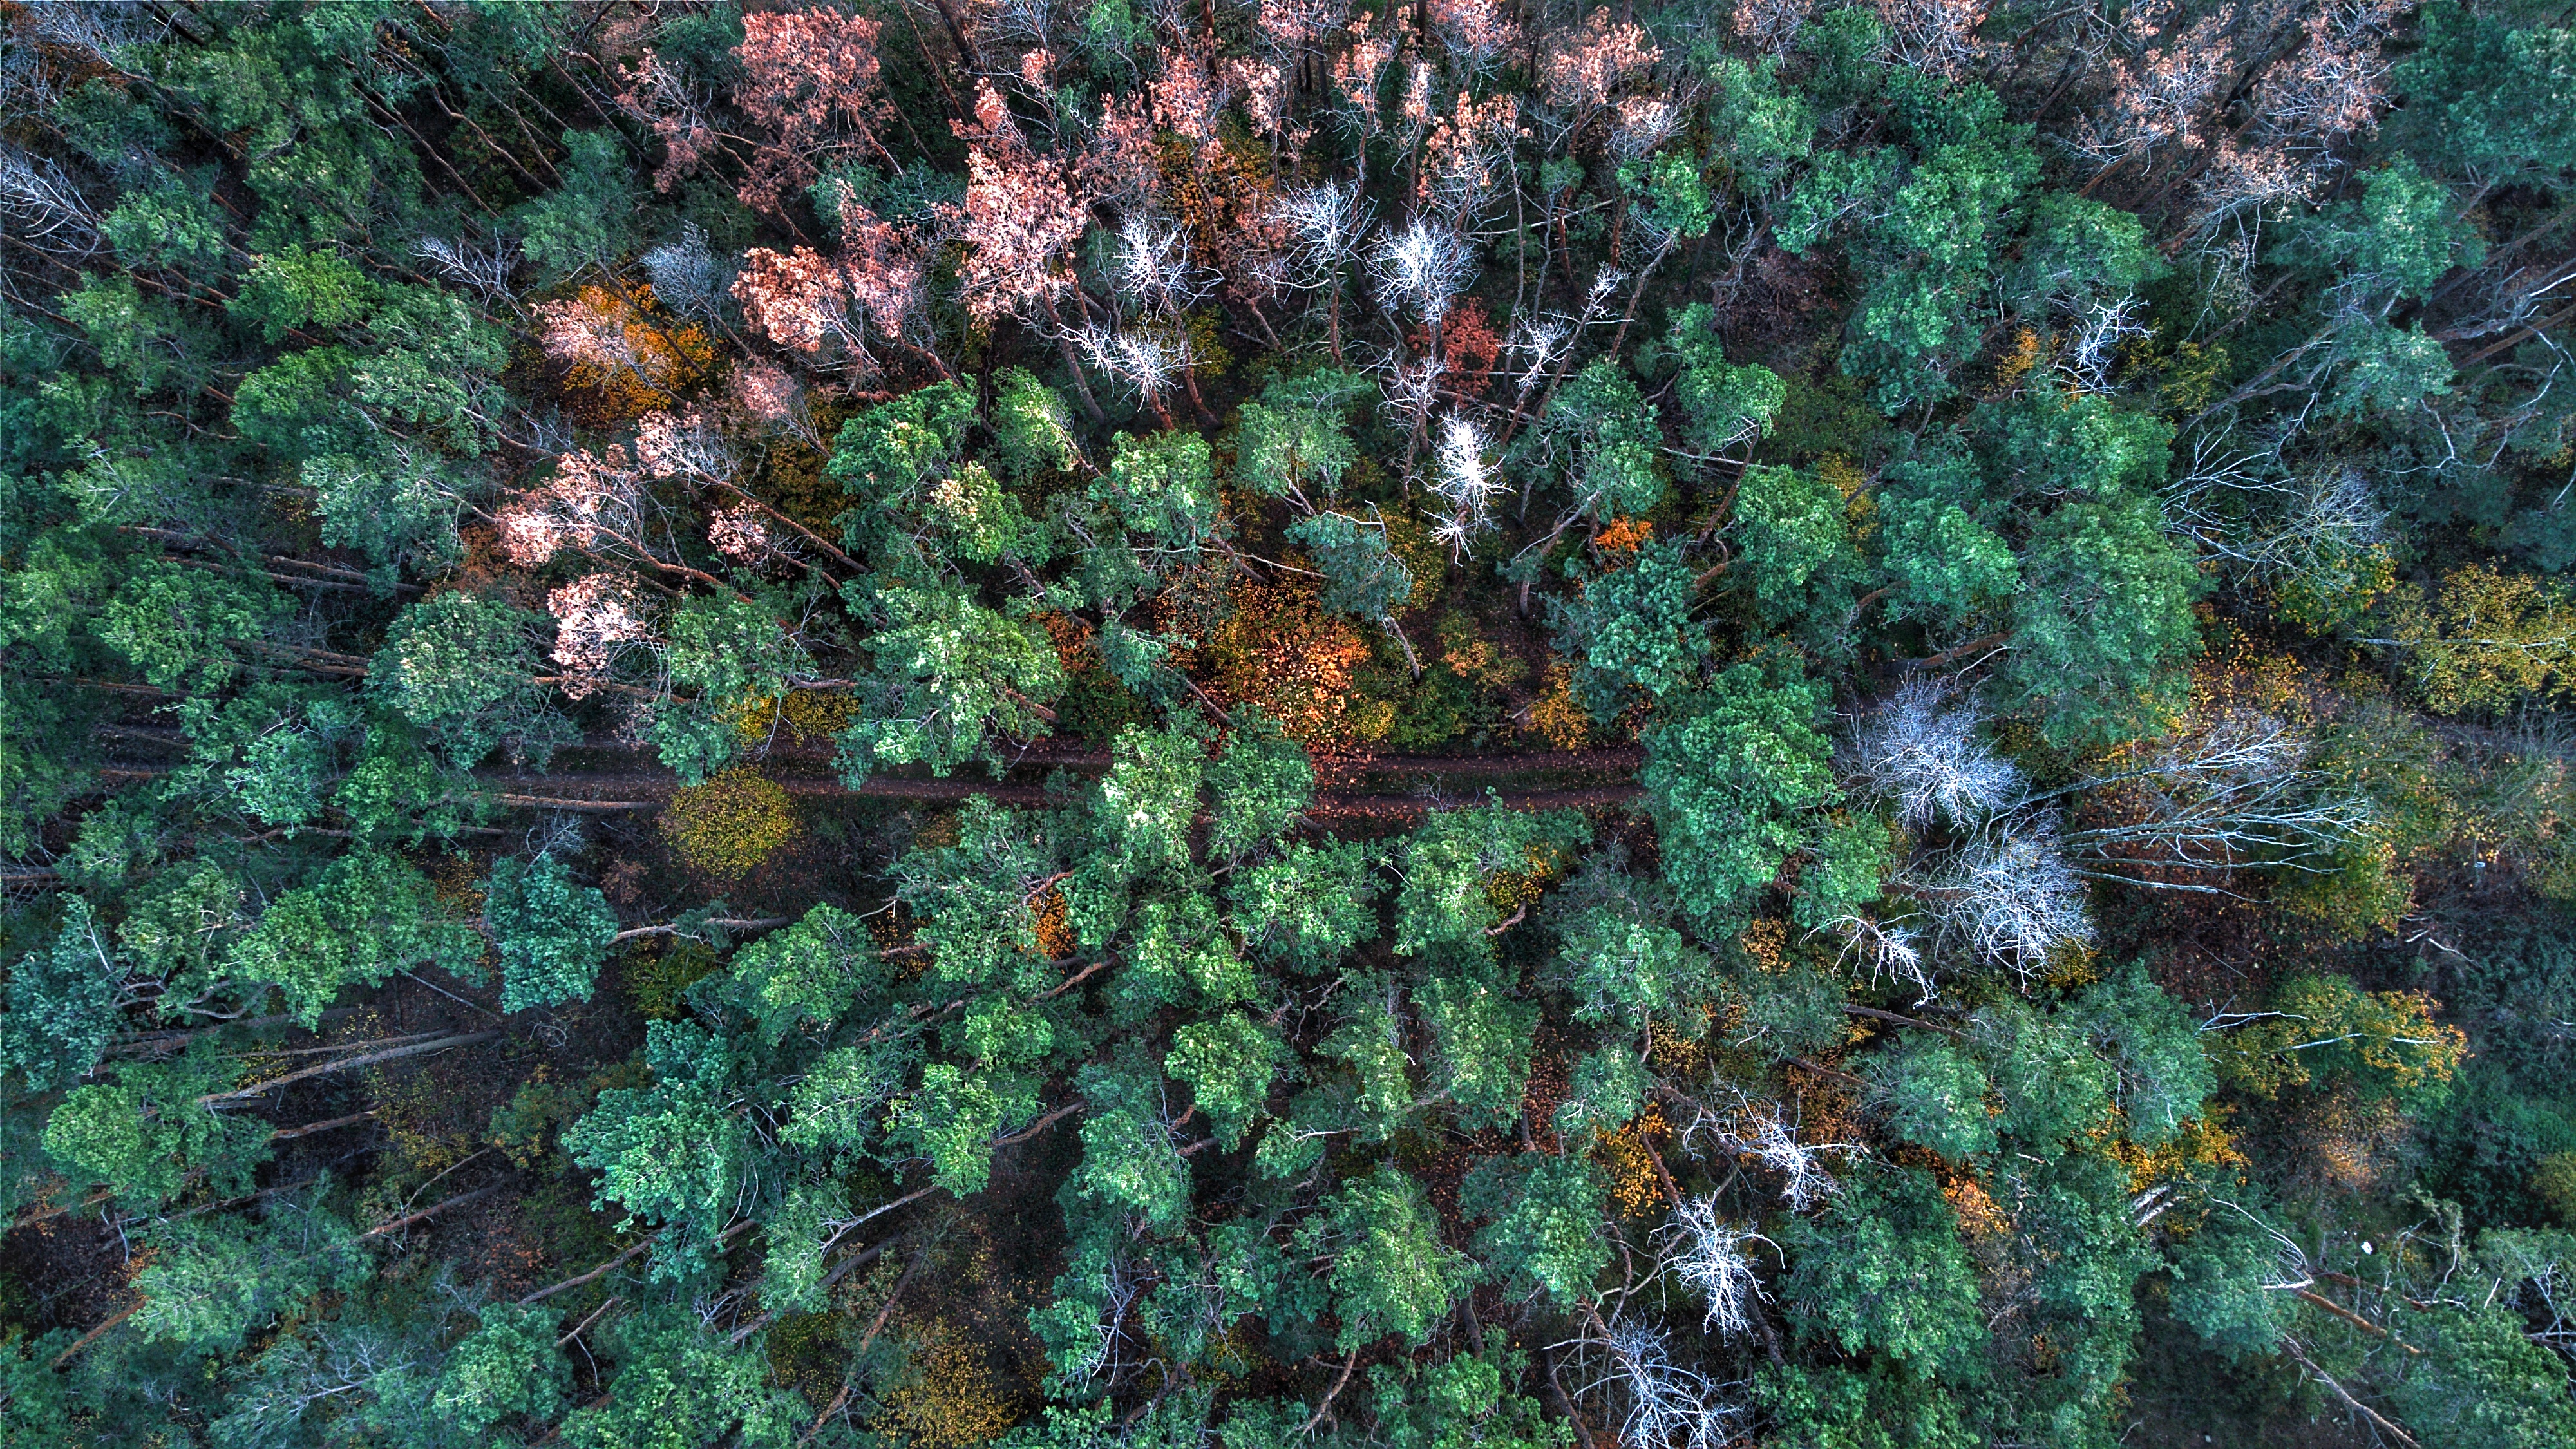 UAV image of a mixed forest